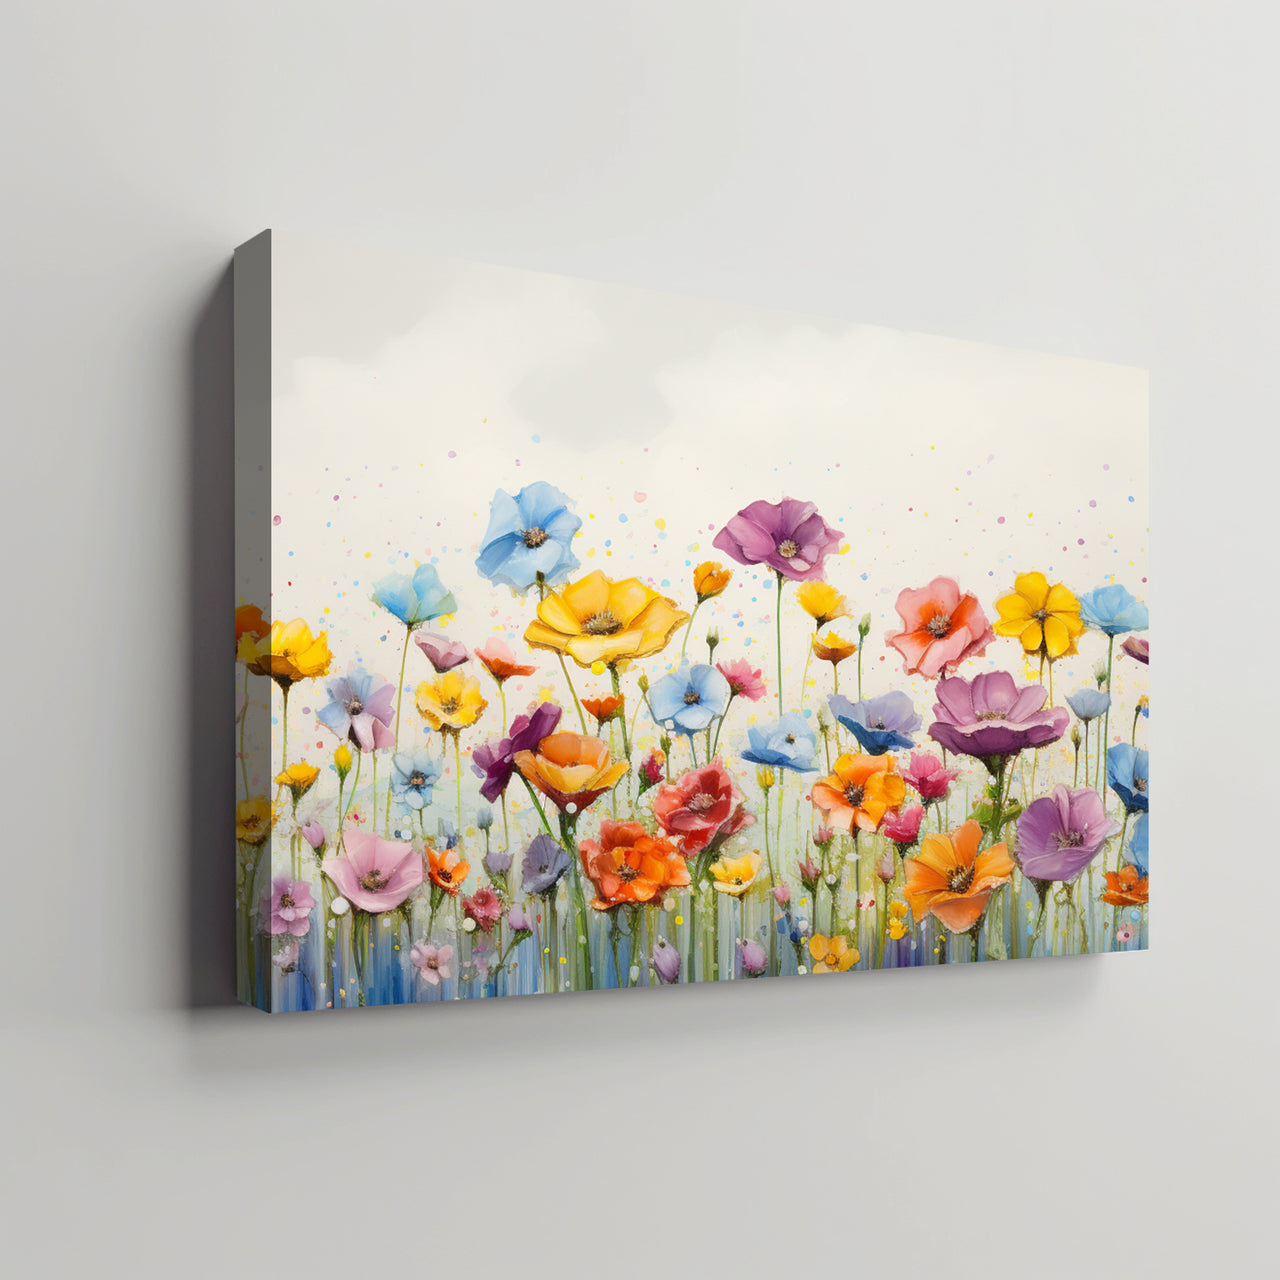 Wildflowers on Canvas, Flowers in Rain 05, Minimalist Flower Wall Art, Abstract Wall Art, Watercolor flowers, Floral Print, Classic, Rustic Farmhouse, Wildflower Home Decor, Flower Painting Canvas, Floral Wall Art